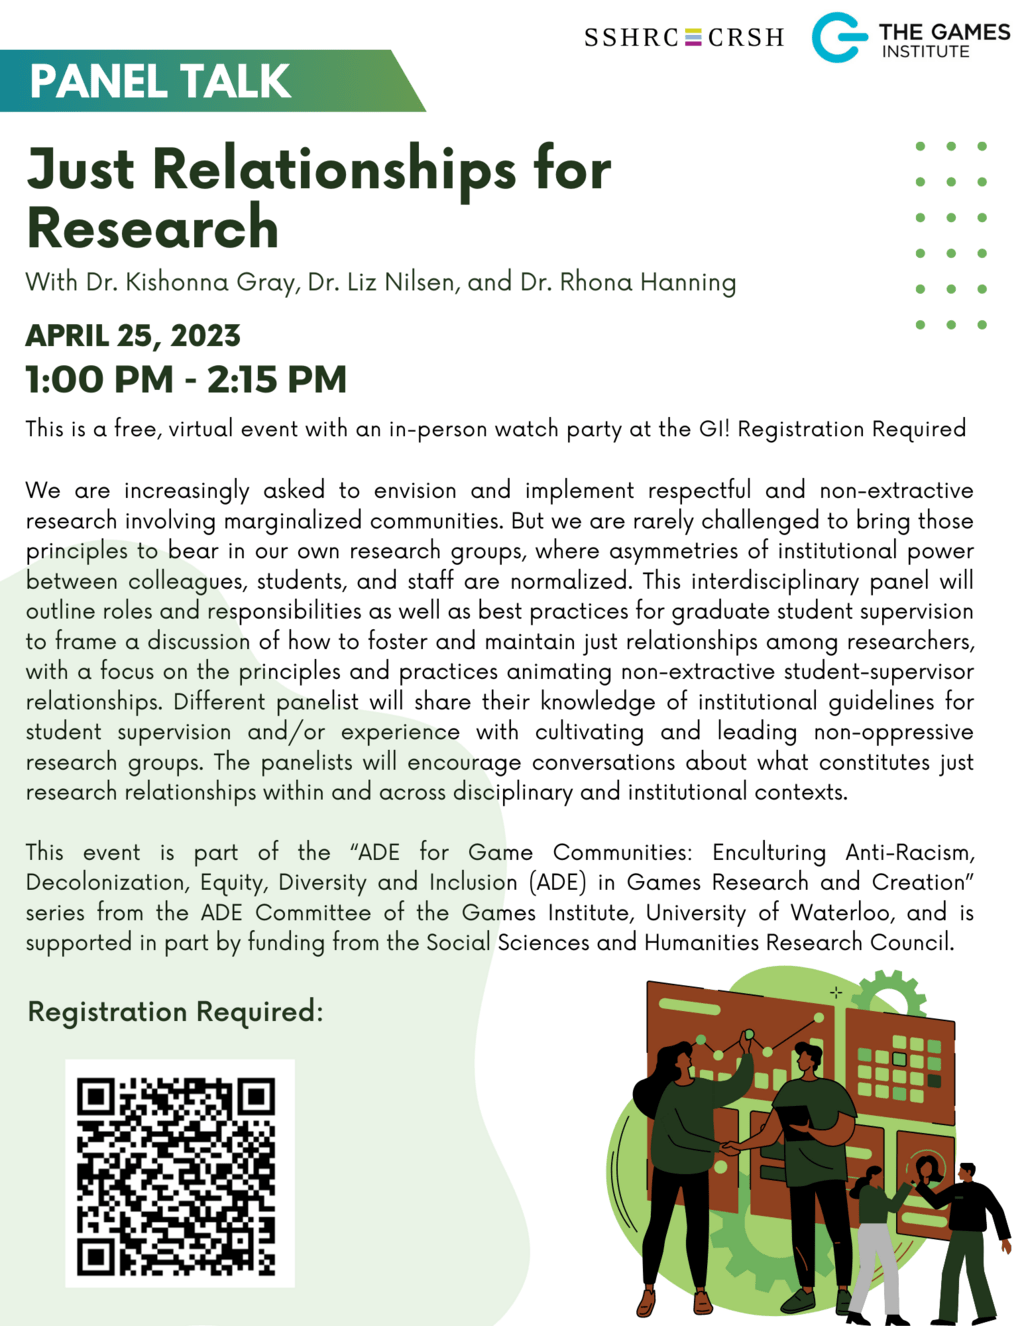 Just relationships panel poster